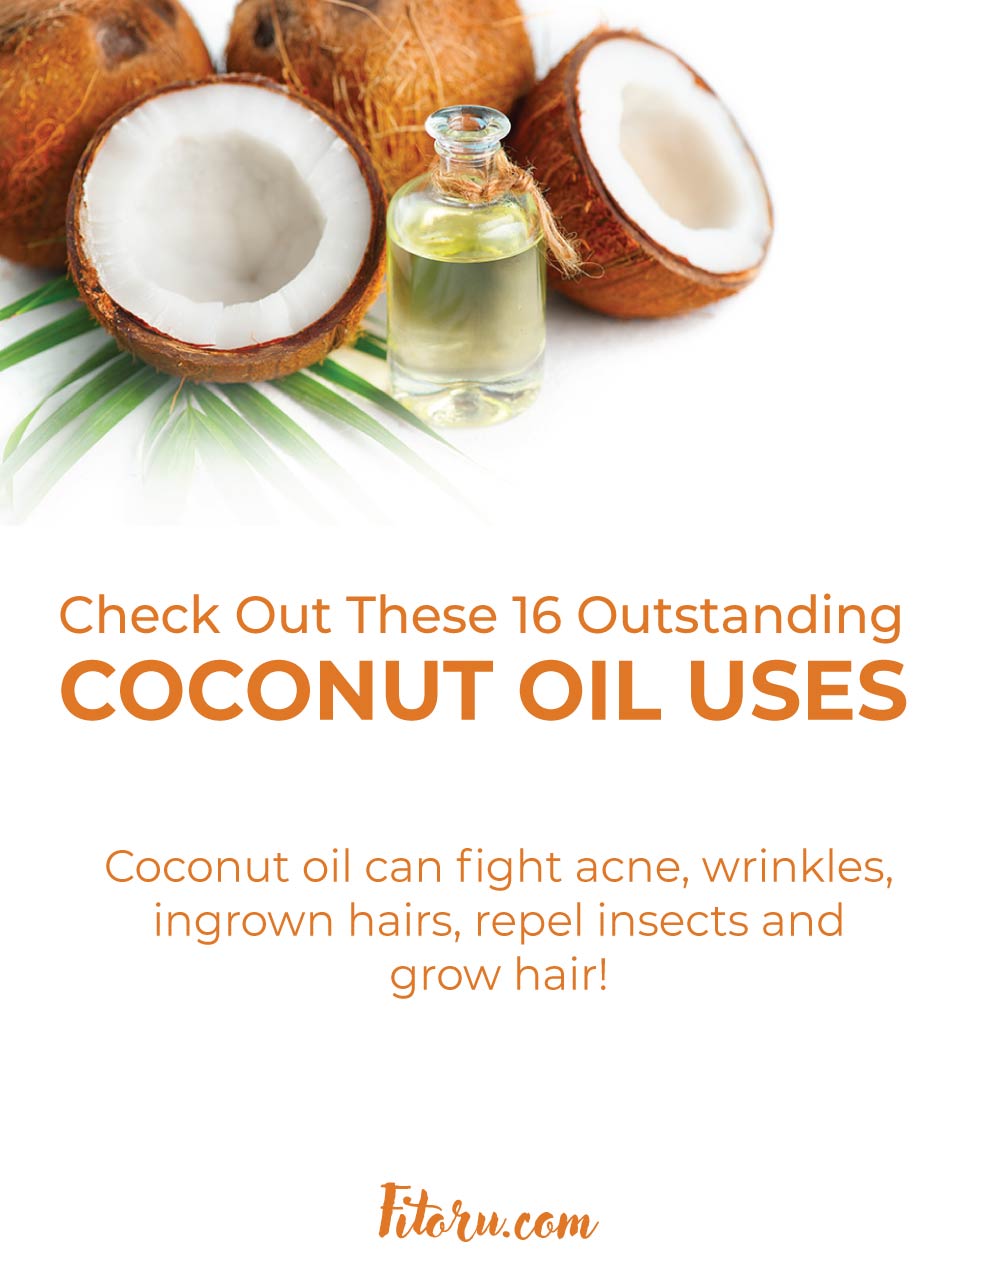 Check Out These 16 Outstanding Coconut Oil Uses